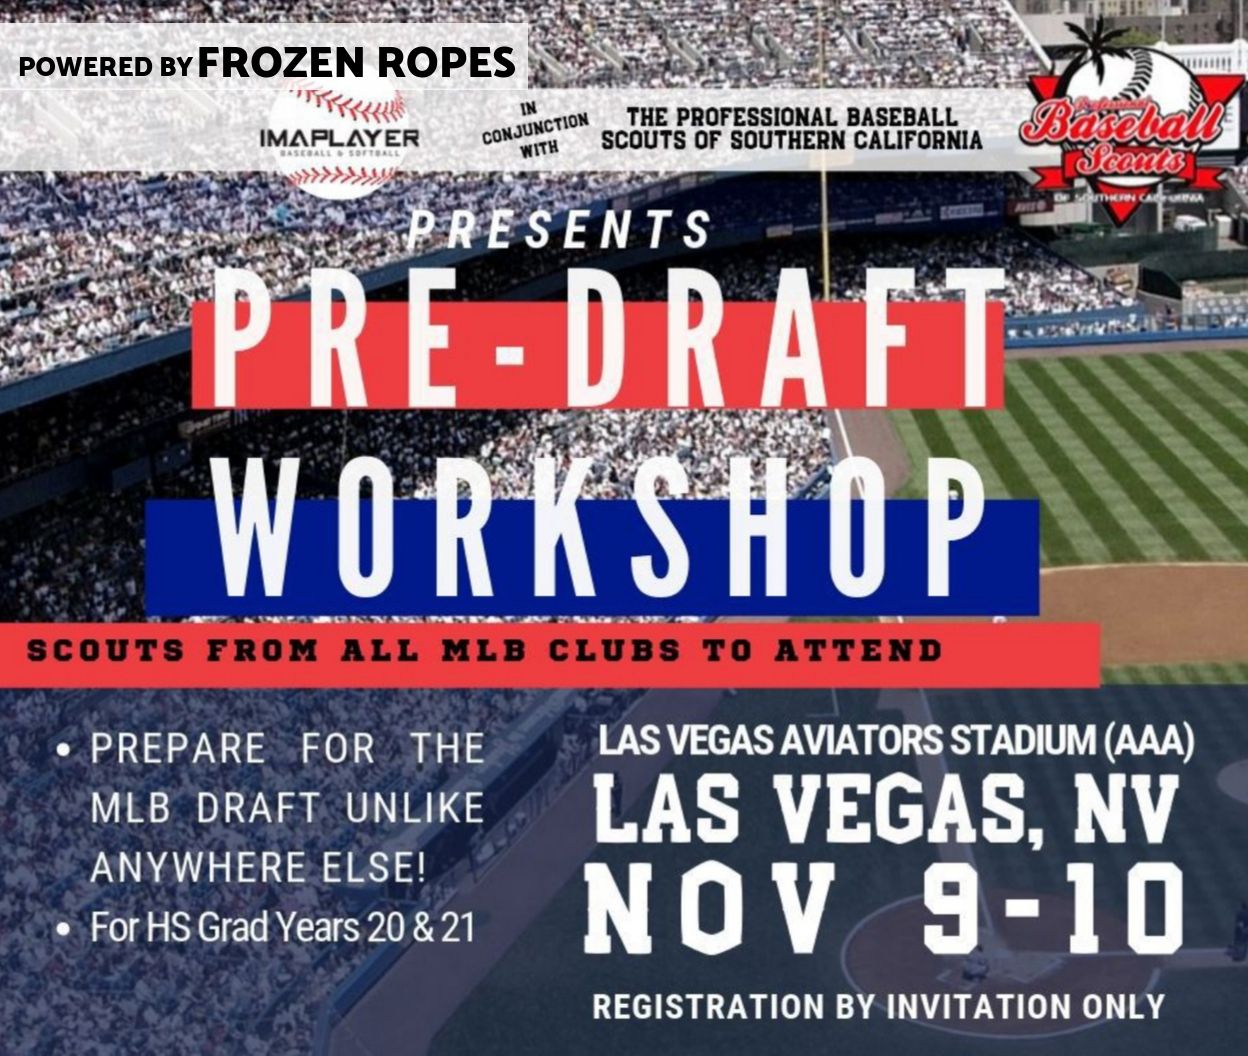 pre-draft workshop with IMAPLAYER and the Professional Baseball Scouts of Southern California 